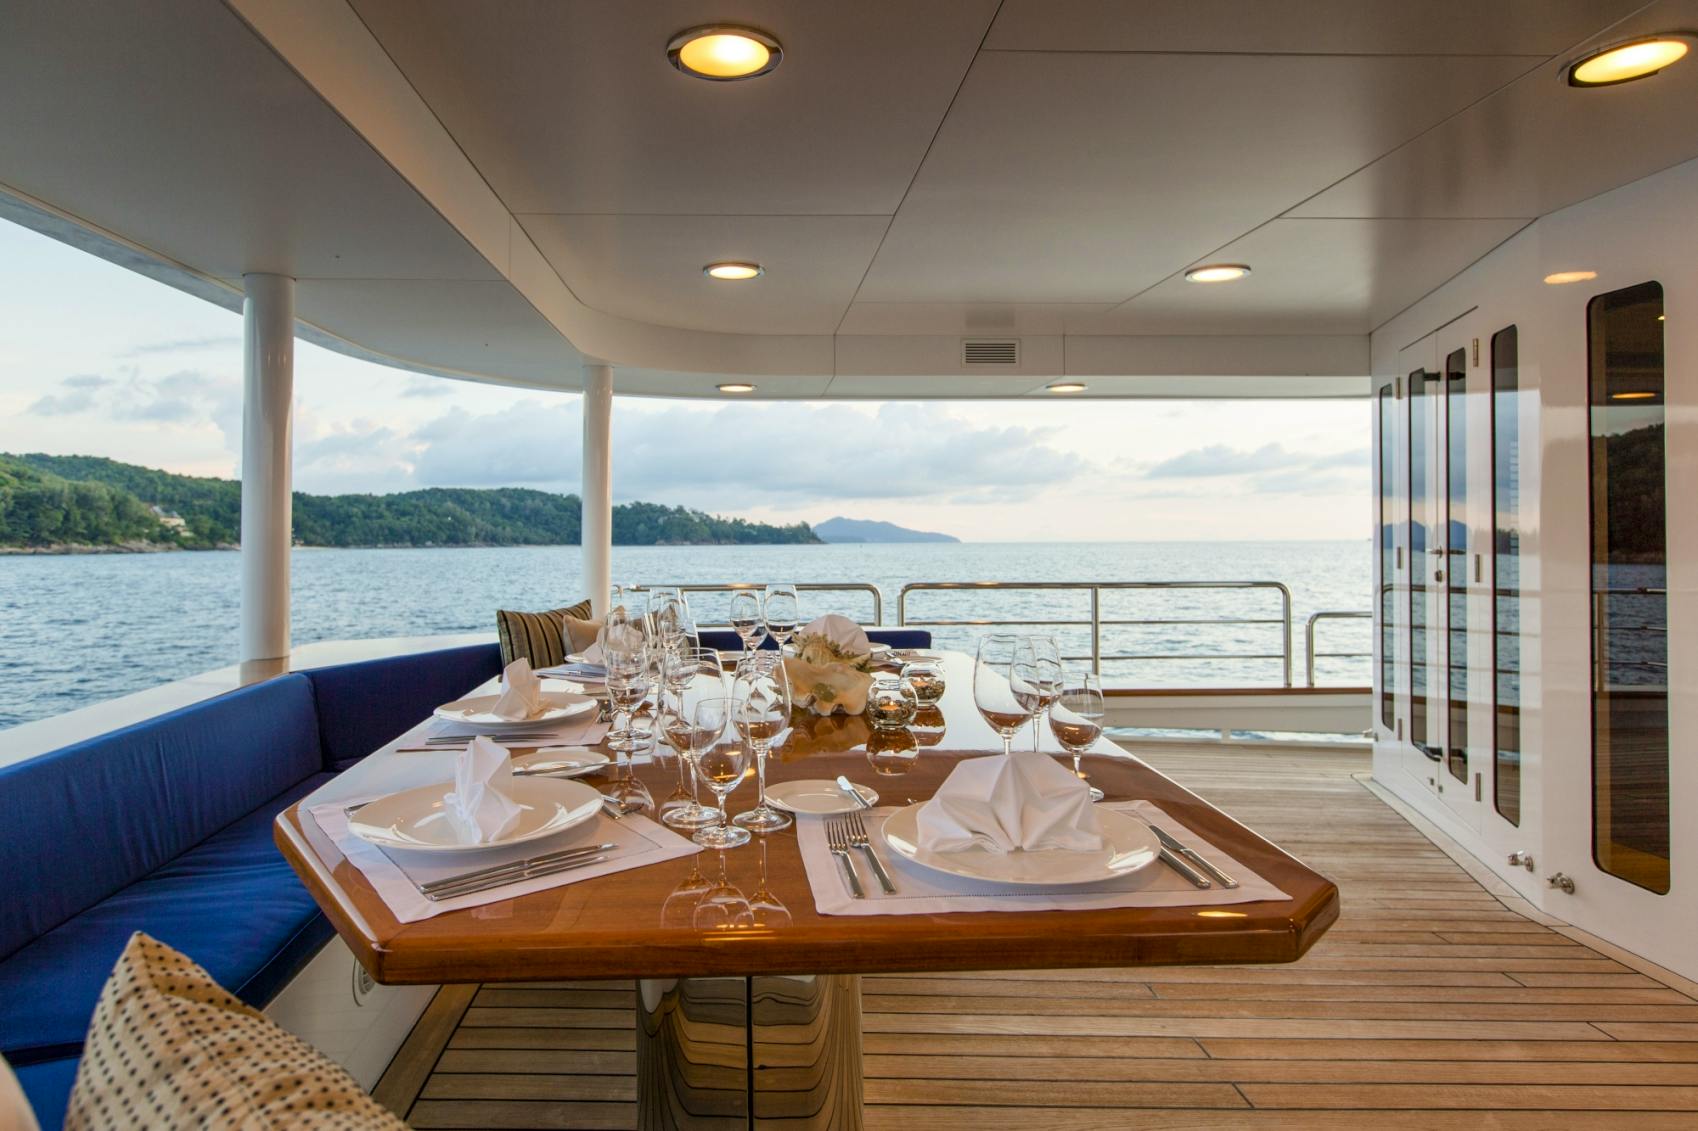 Seasonal Rates for NORTHERN SUN Private Luxury Yacht For Charter